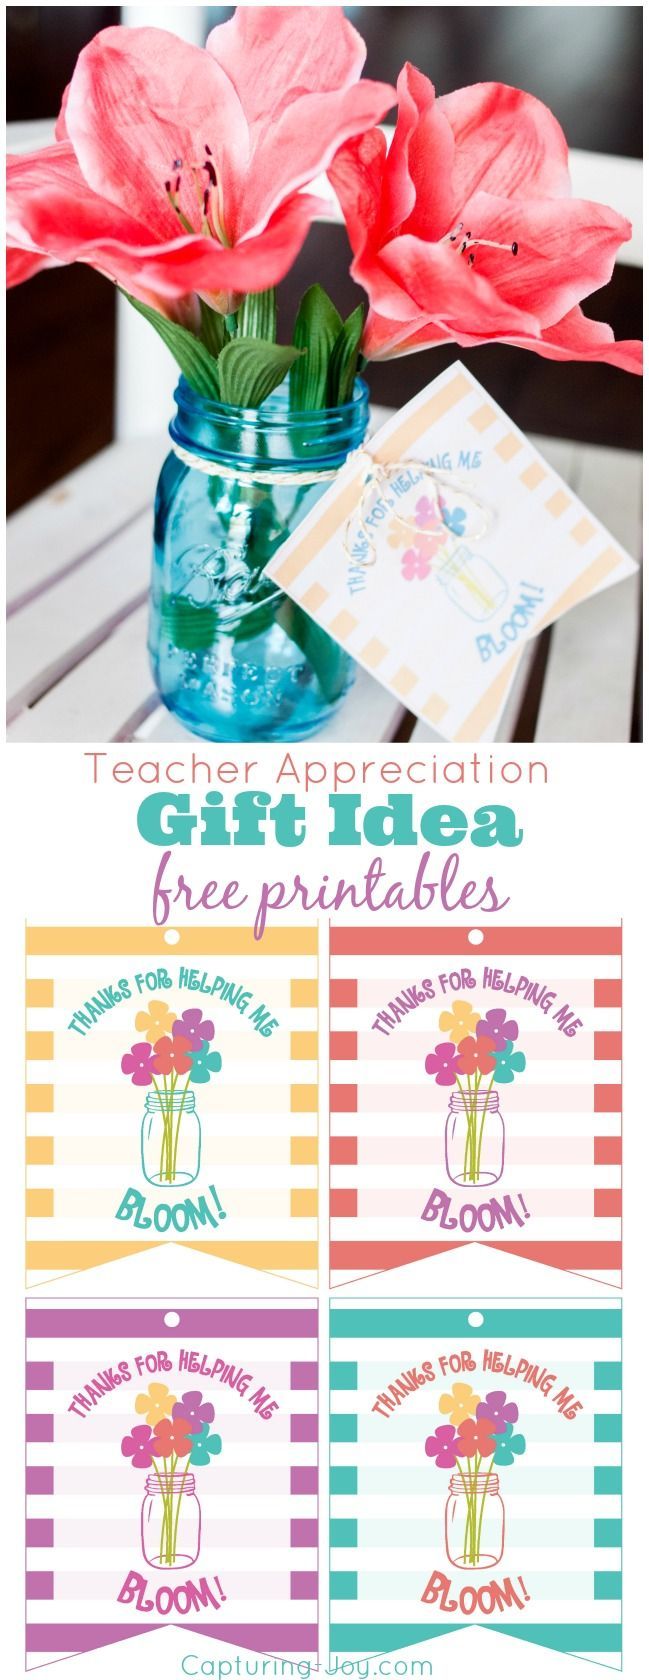 Teacher Appreciation Gift Idea Free Printables in 4 colors. Thank you for helpin...